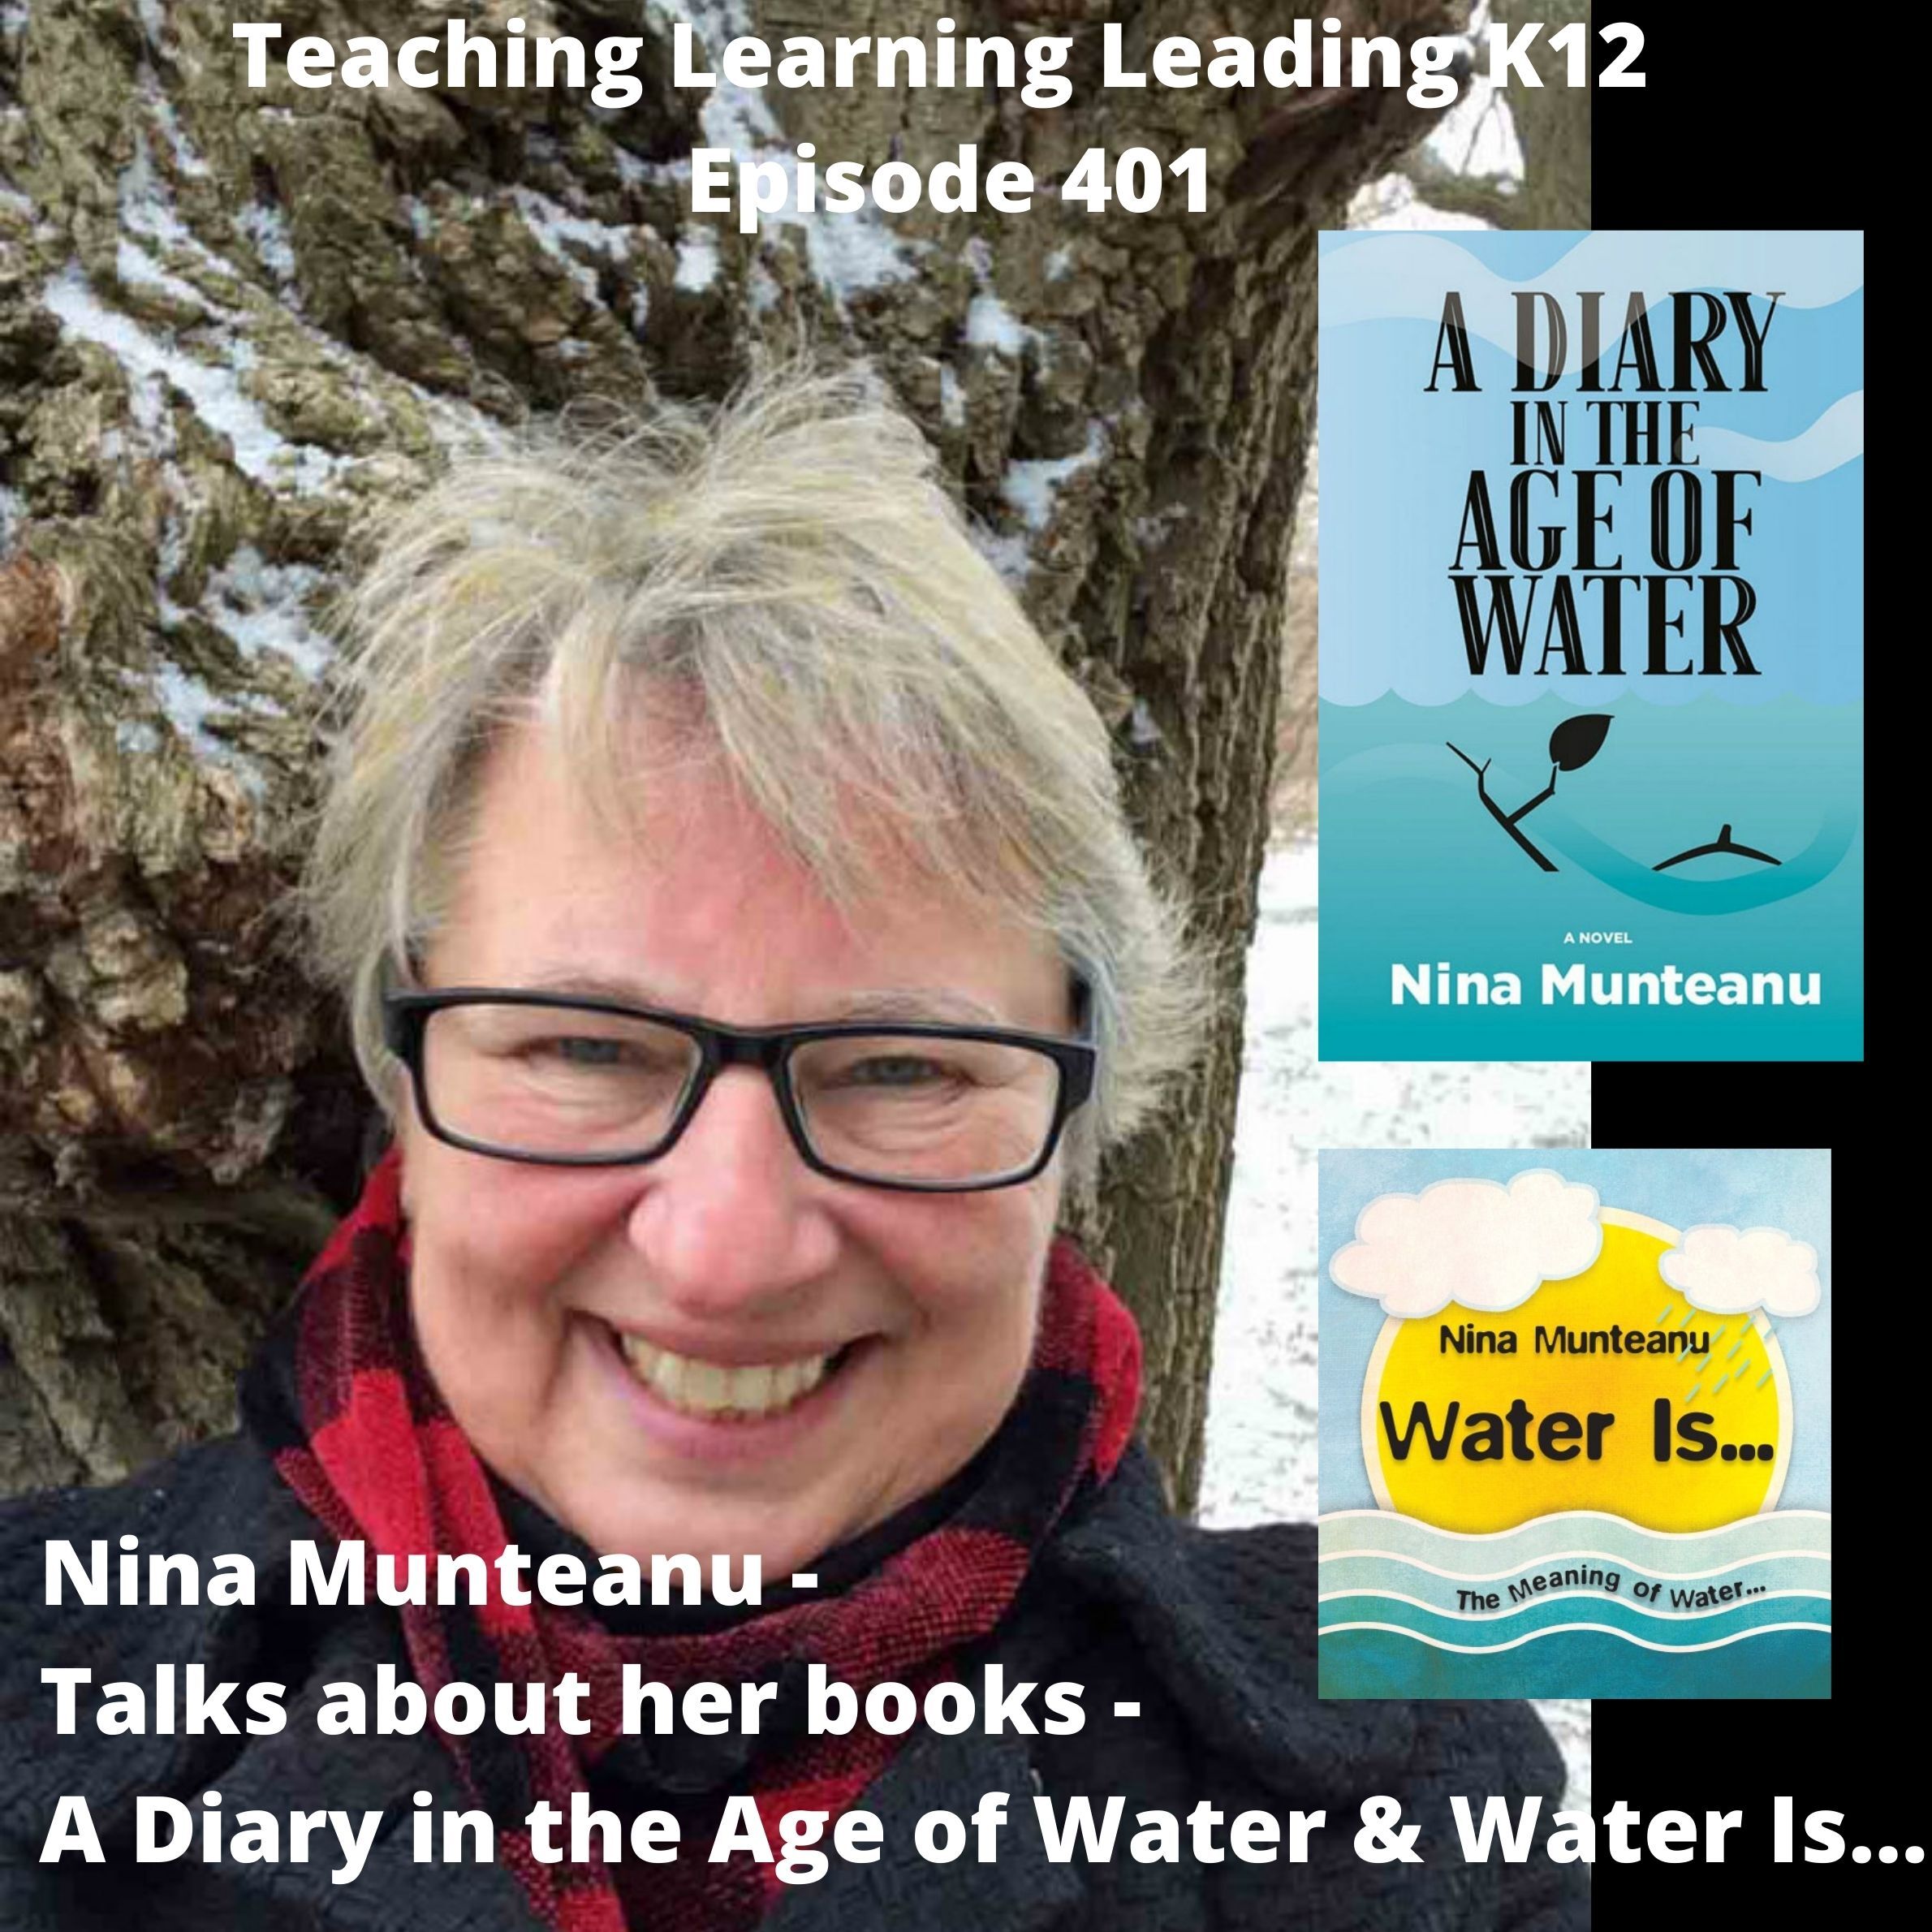 Nina Munteanu - Diary in the Age of Water & Water Is... 401